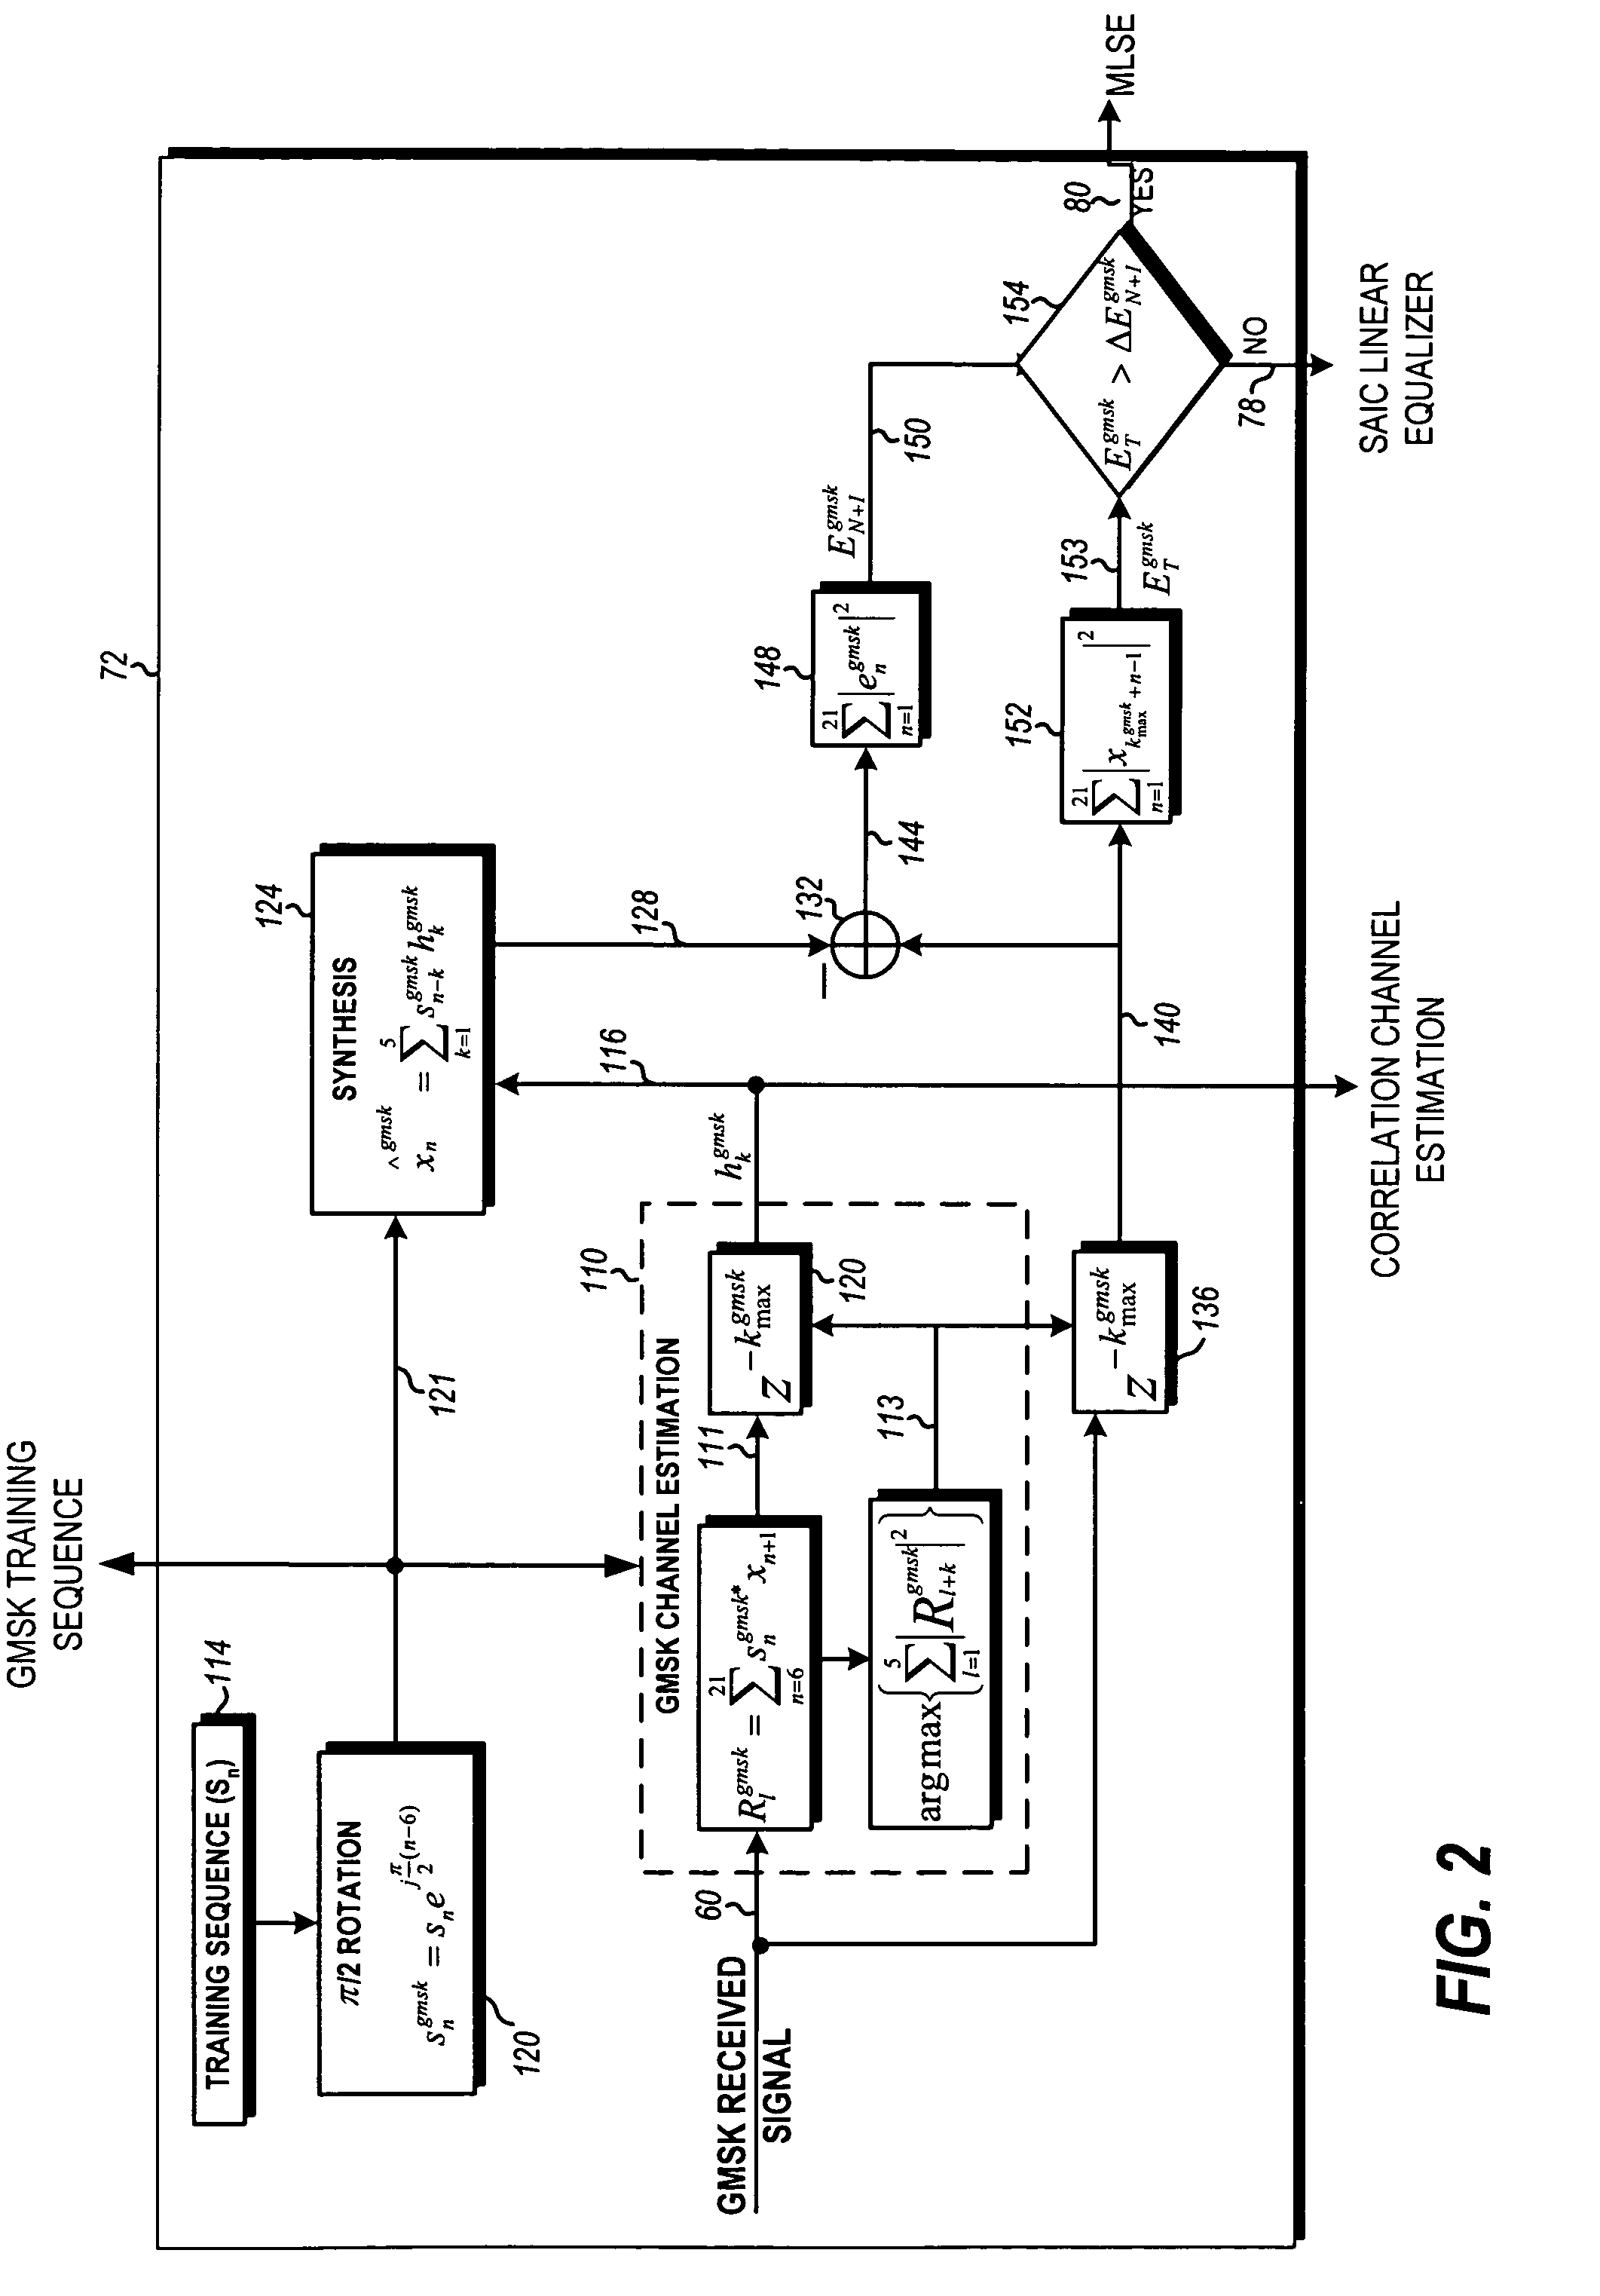 Dynamic switching between maximum likelihood sequence estimation (MLSE) and linear equalizer for single antenna interference cancellation (SAIC) in a global system for mobile communications (GSM) system